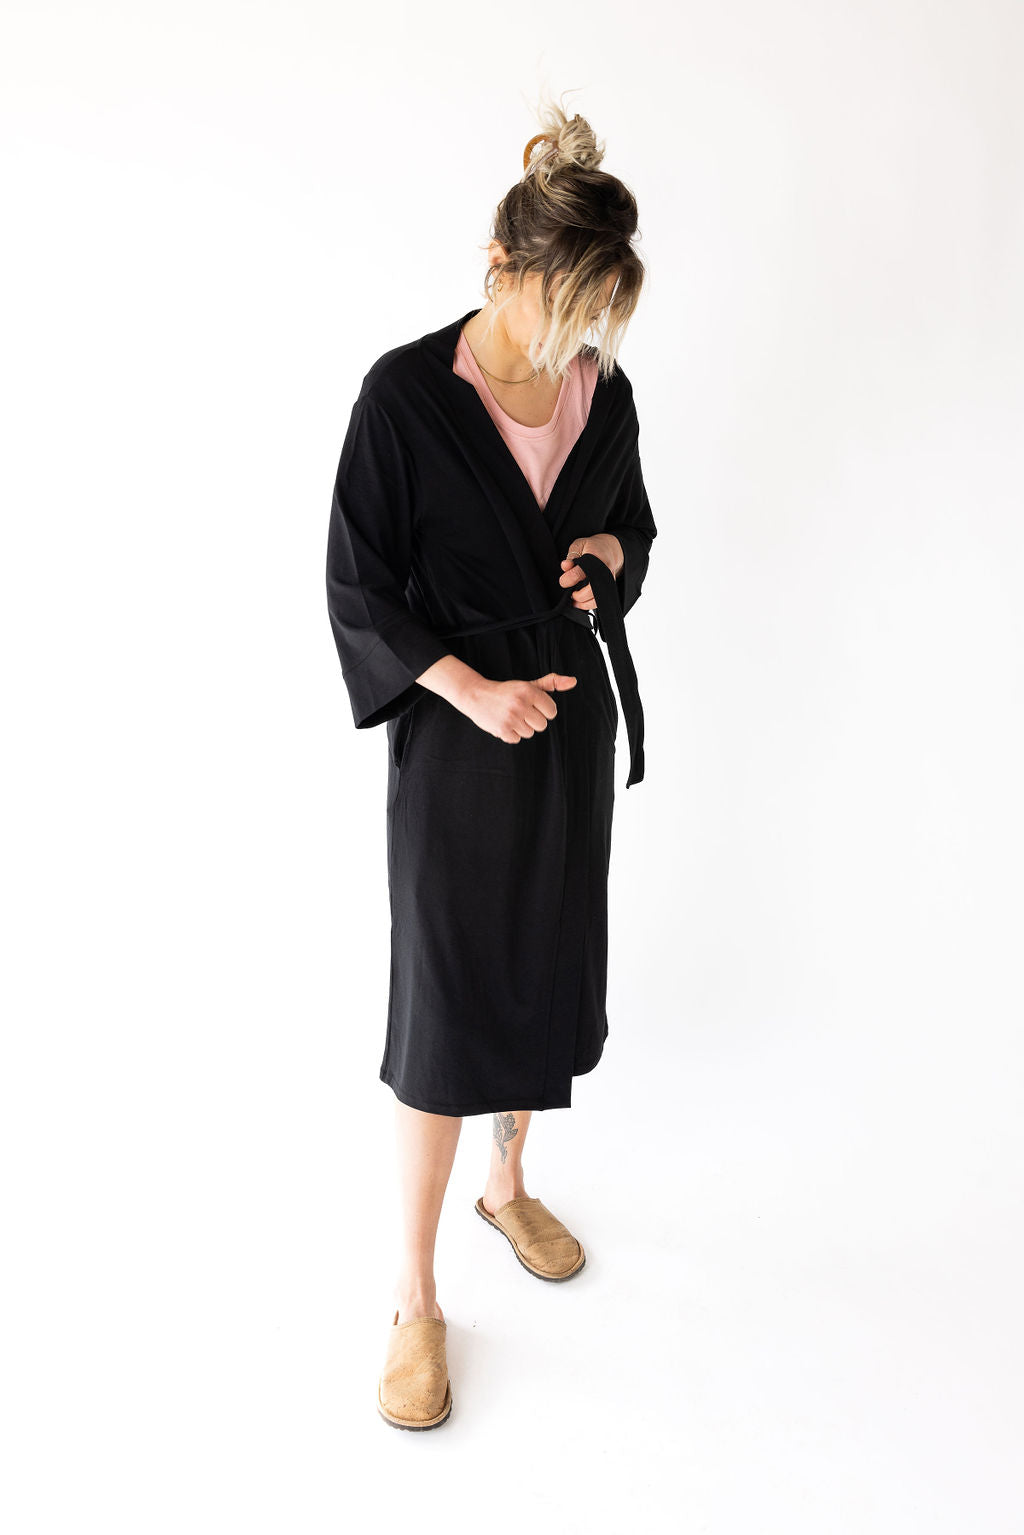 The Jersey Robe in Heather Grey